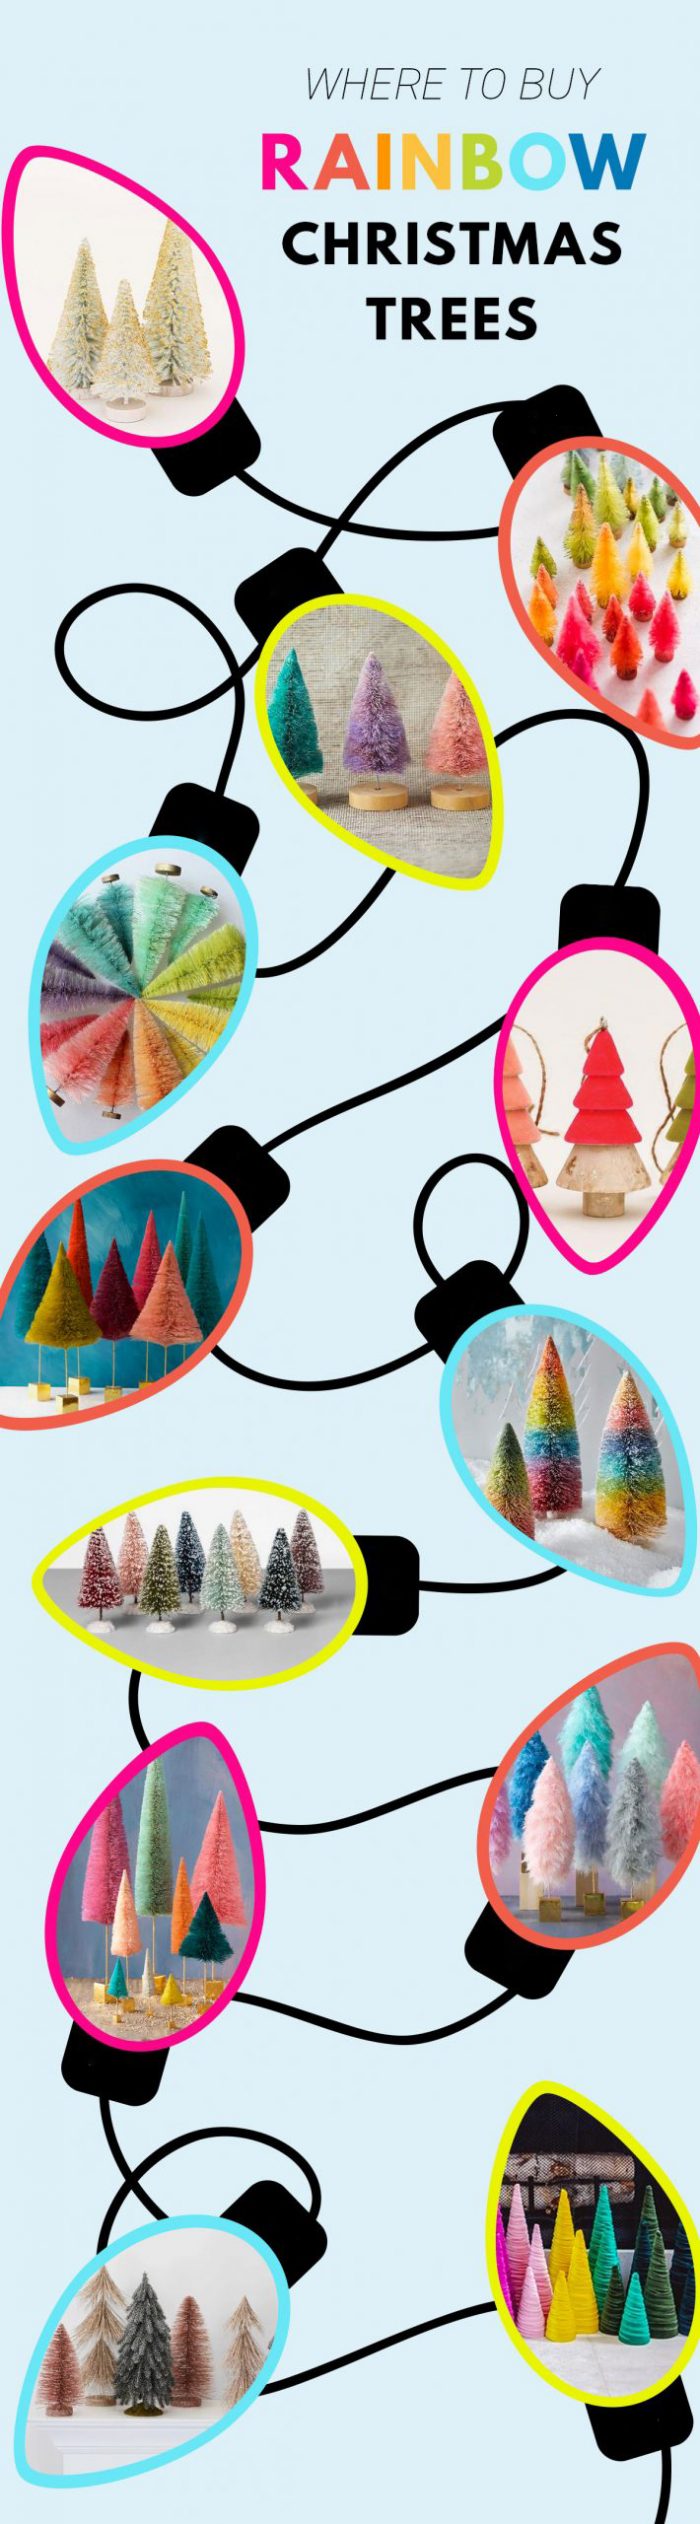 Where To Buy Colorful Bottle Brush Trees and Decorative Christmas Trees